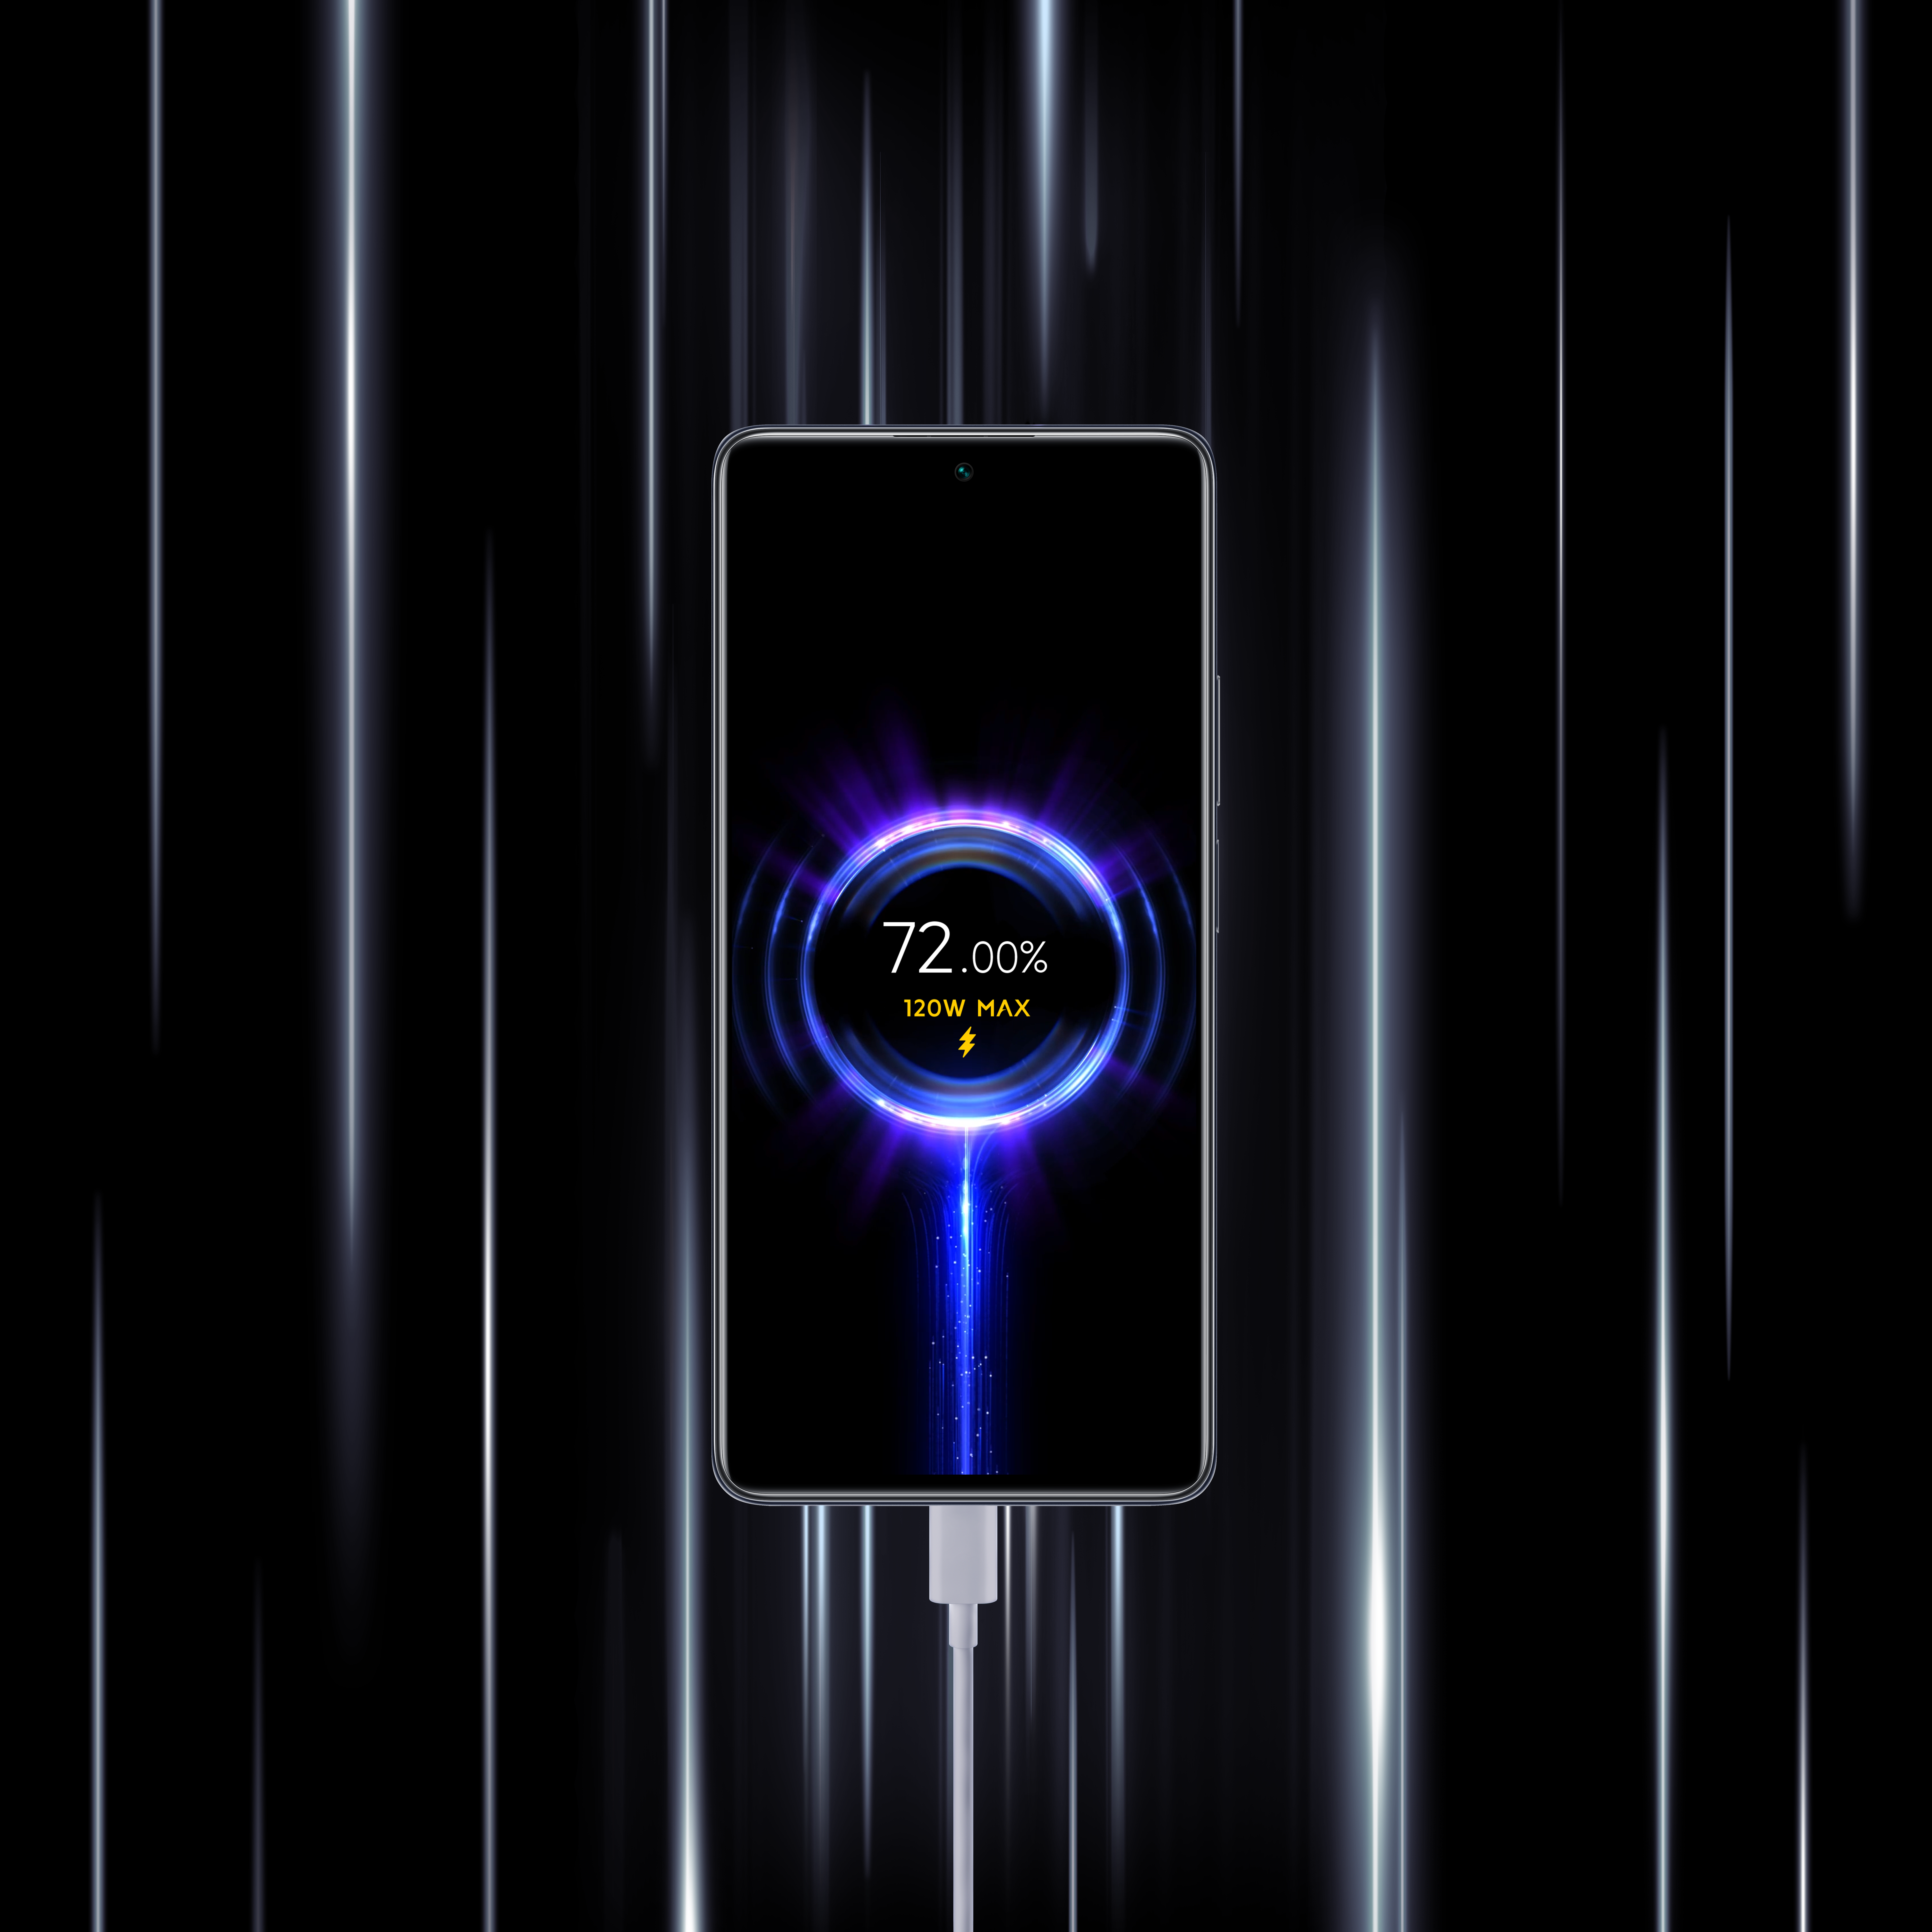 Super fast 120W charger for Xiaomi 11T Pro smartphone, plus long battery life.